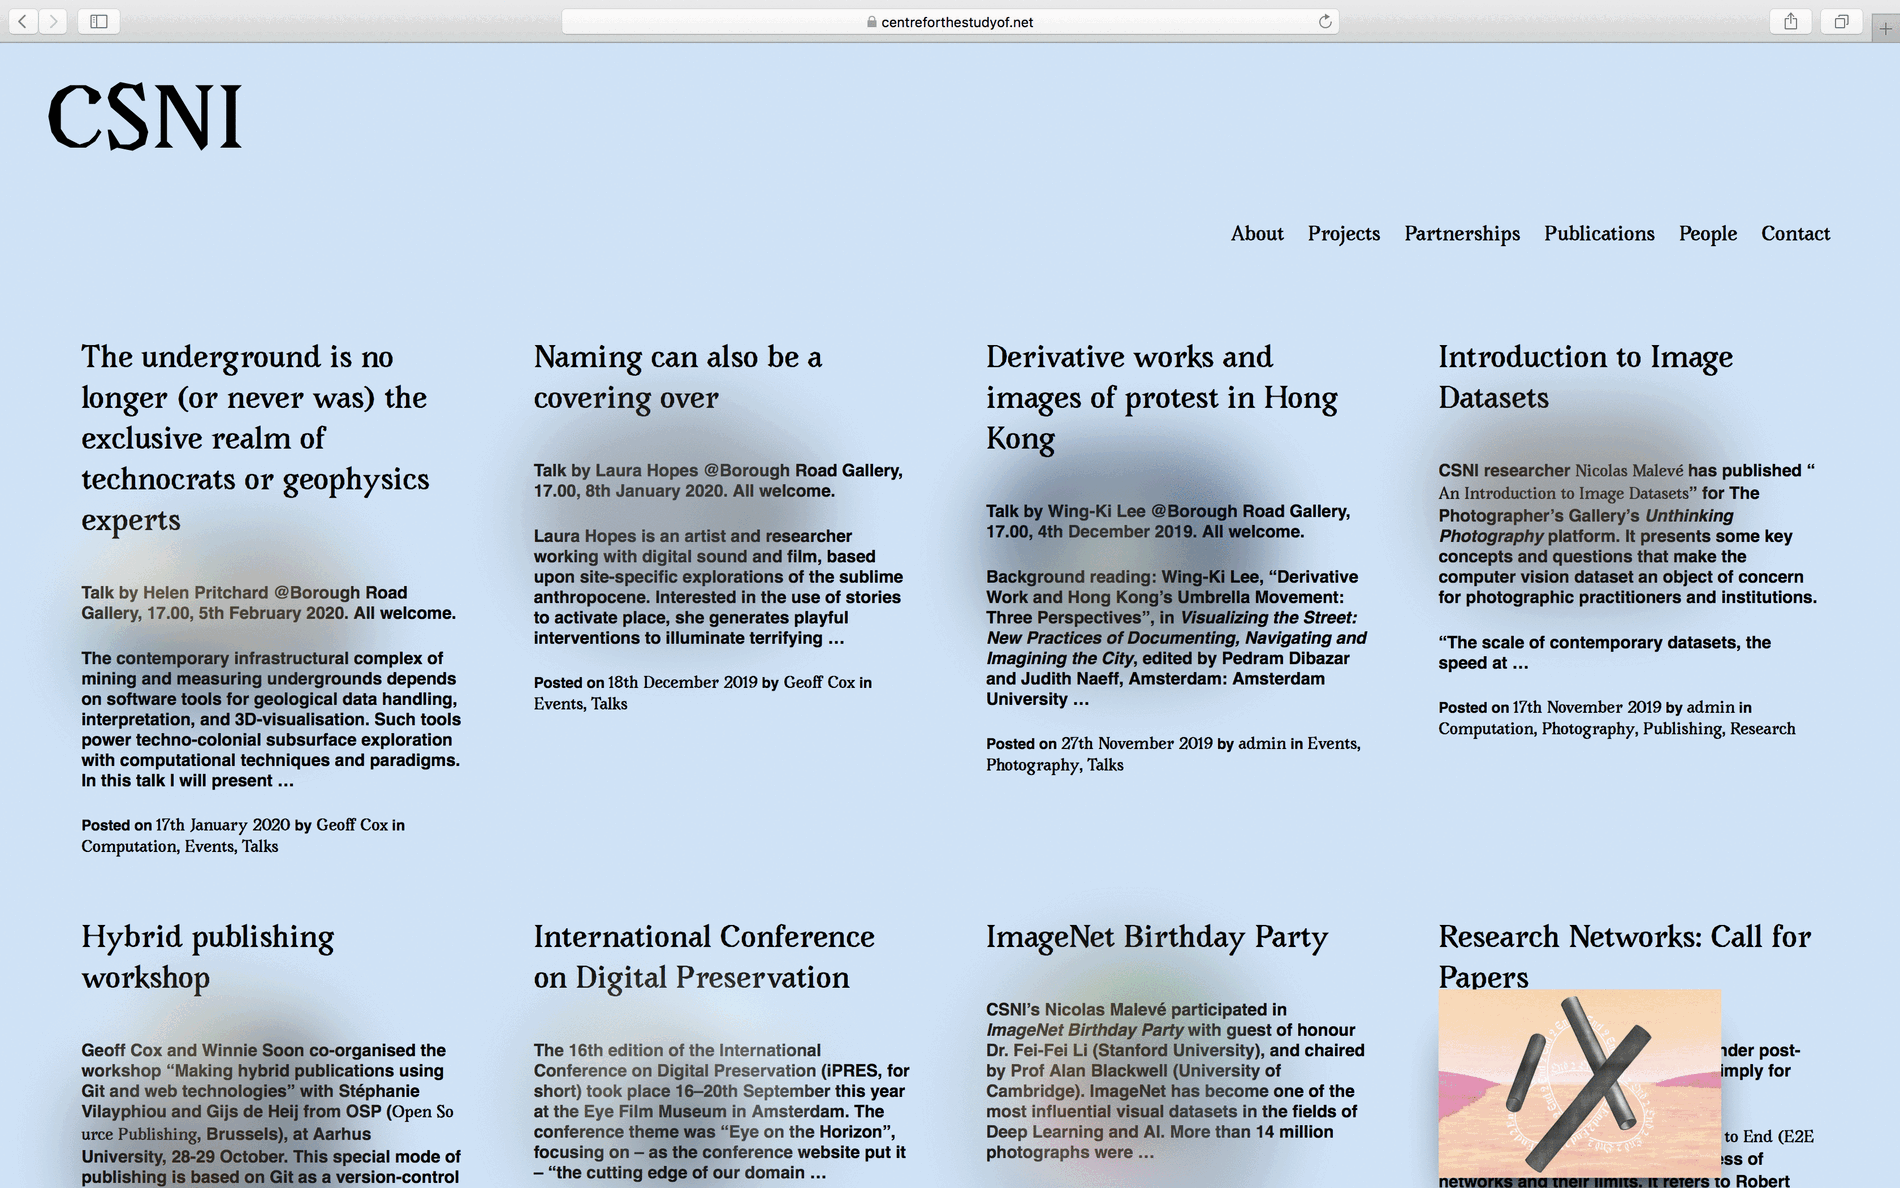 animated gif displaying various pages of the Centre for the study of website